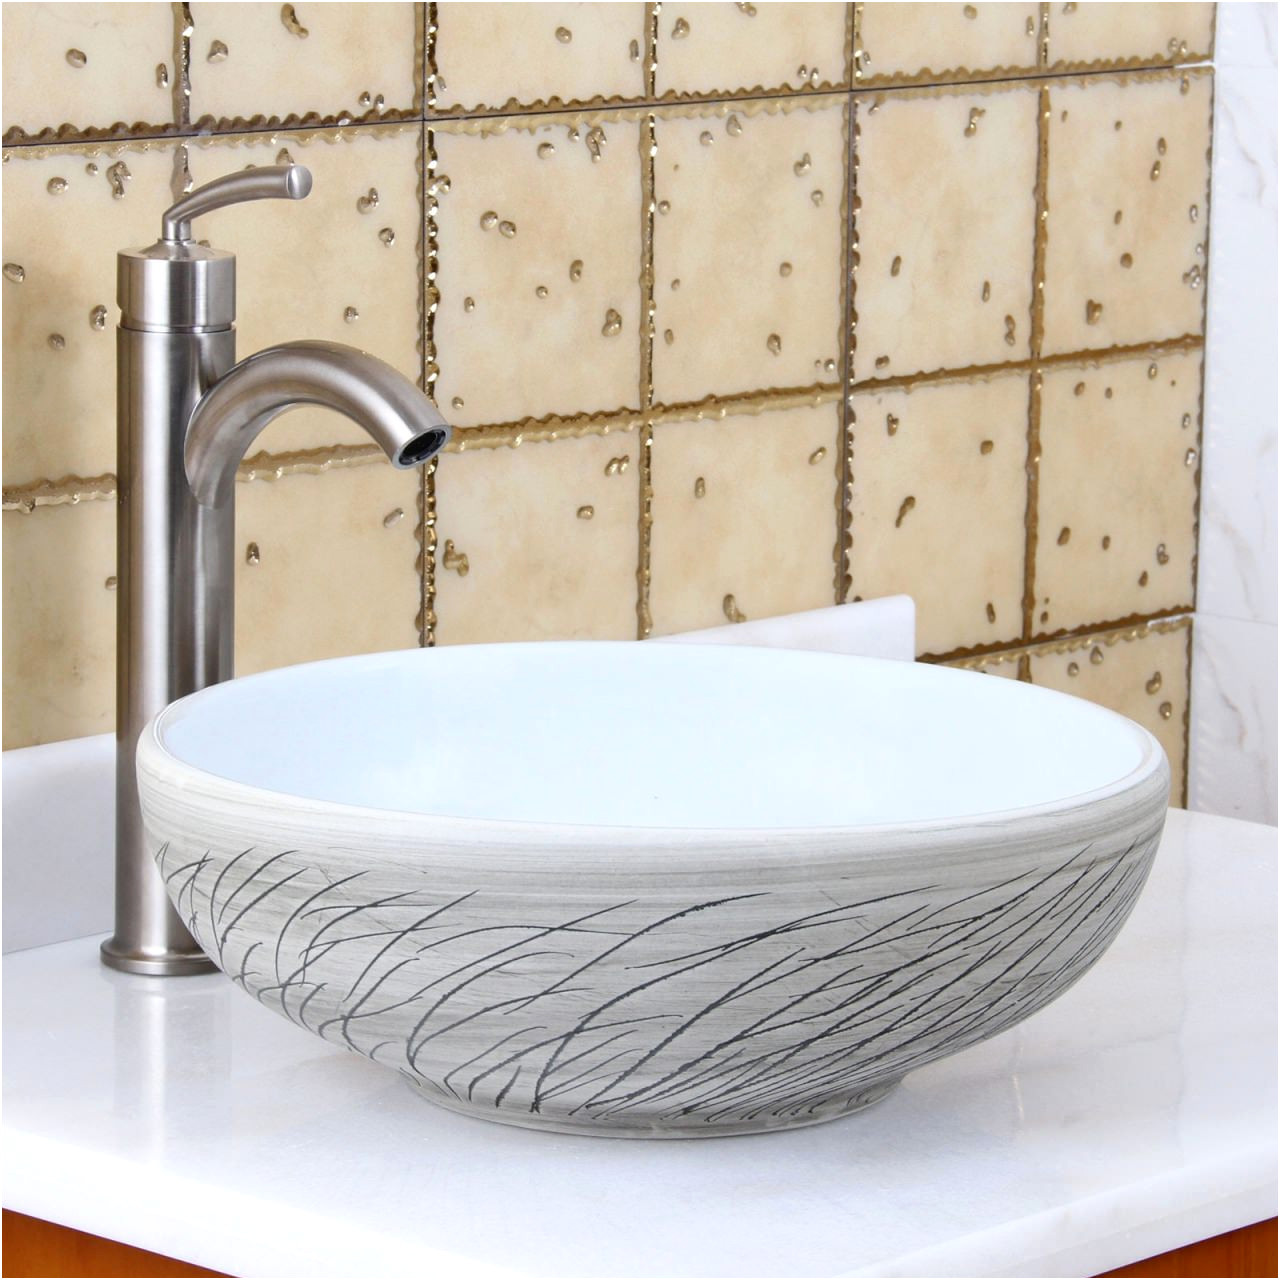 Lovely toilets and Sinks for Small Bathrooms